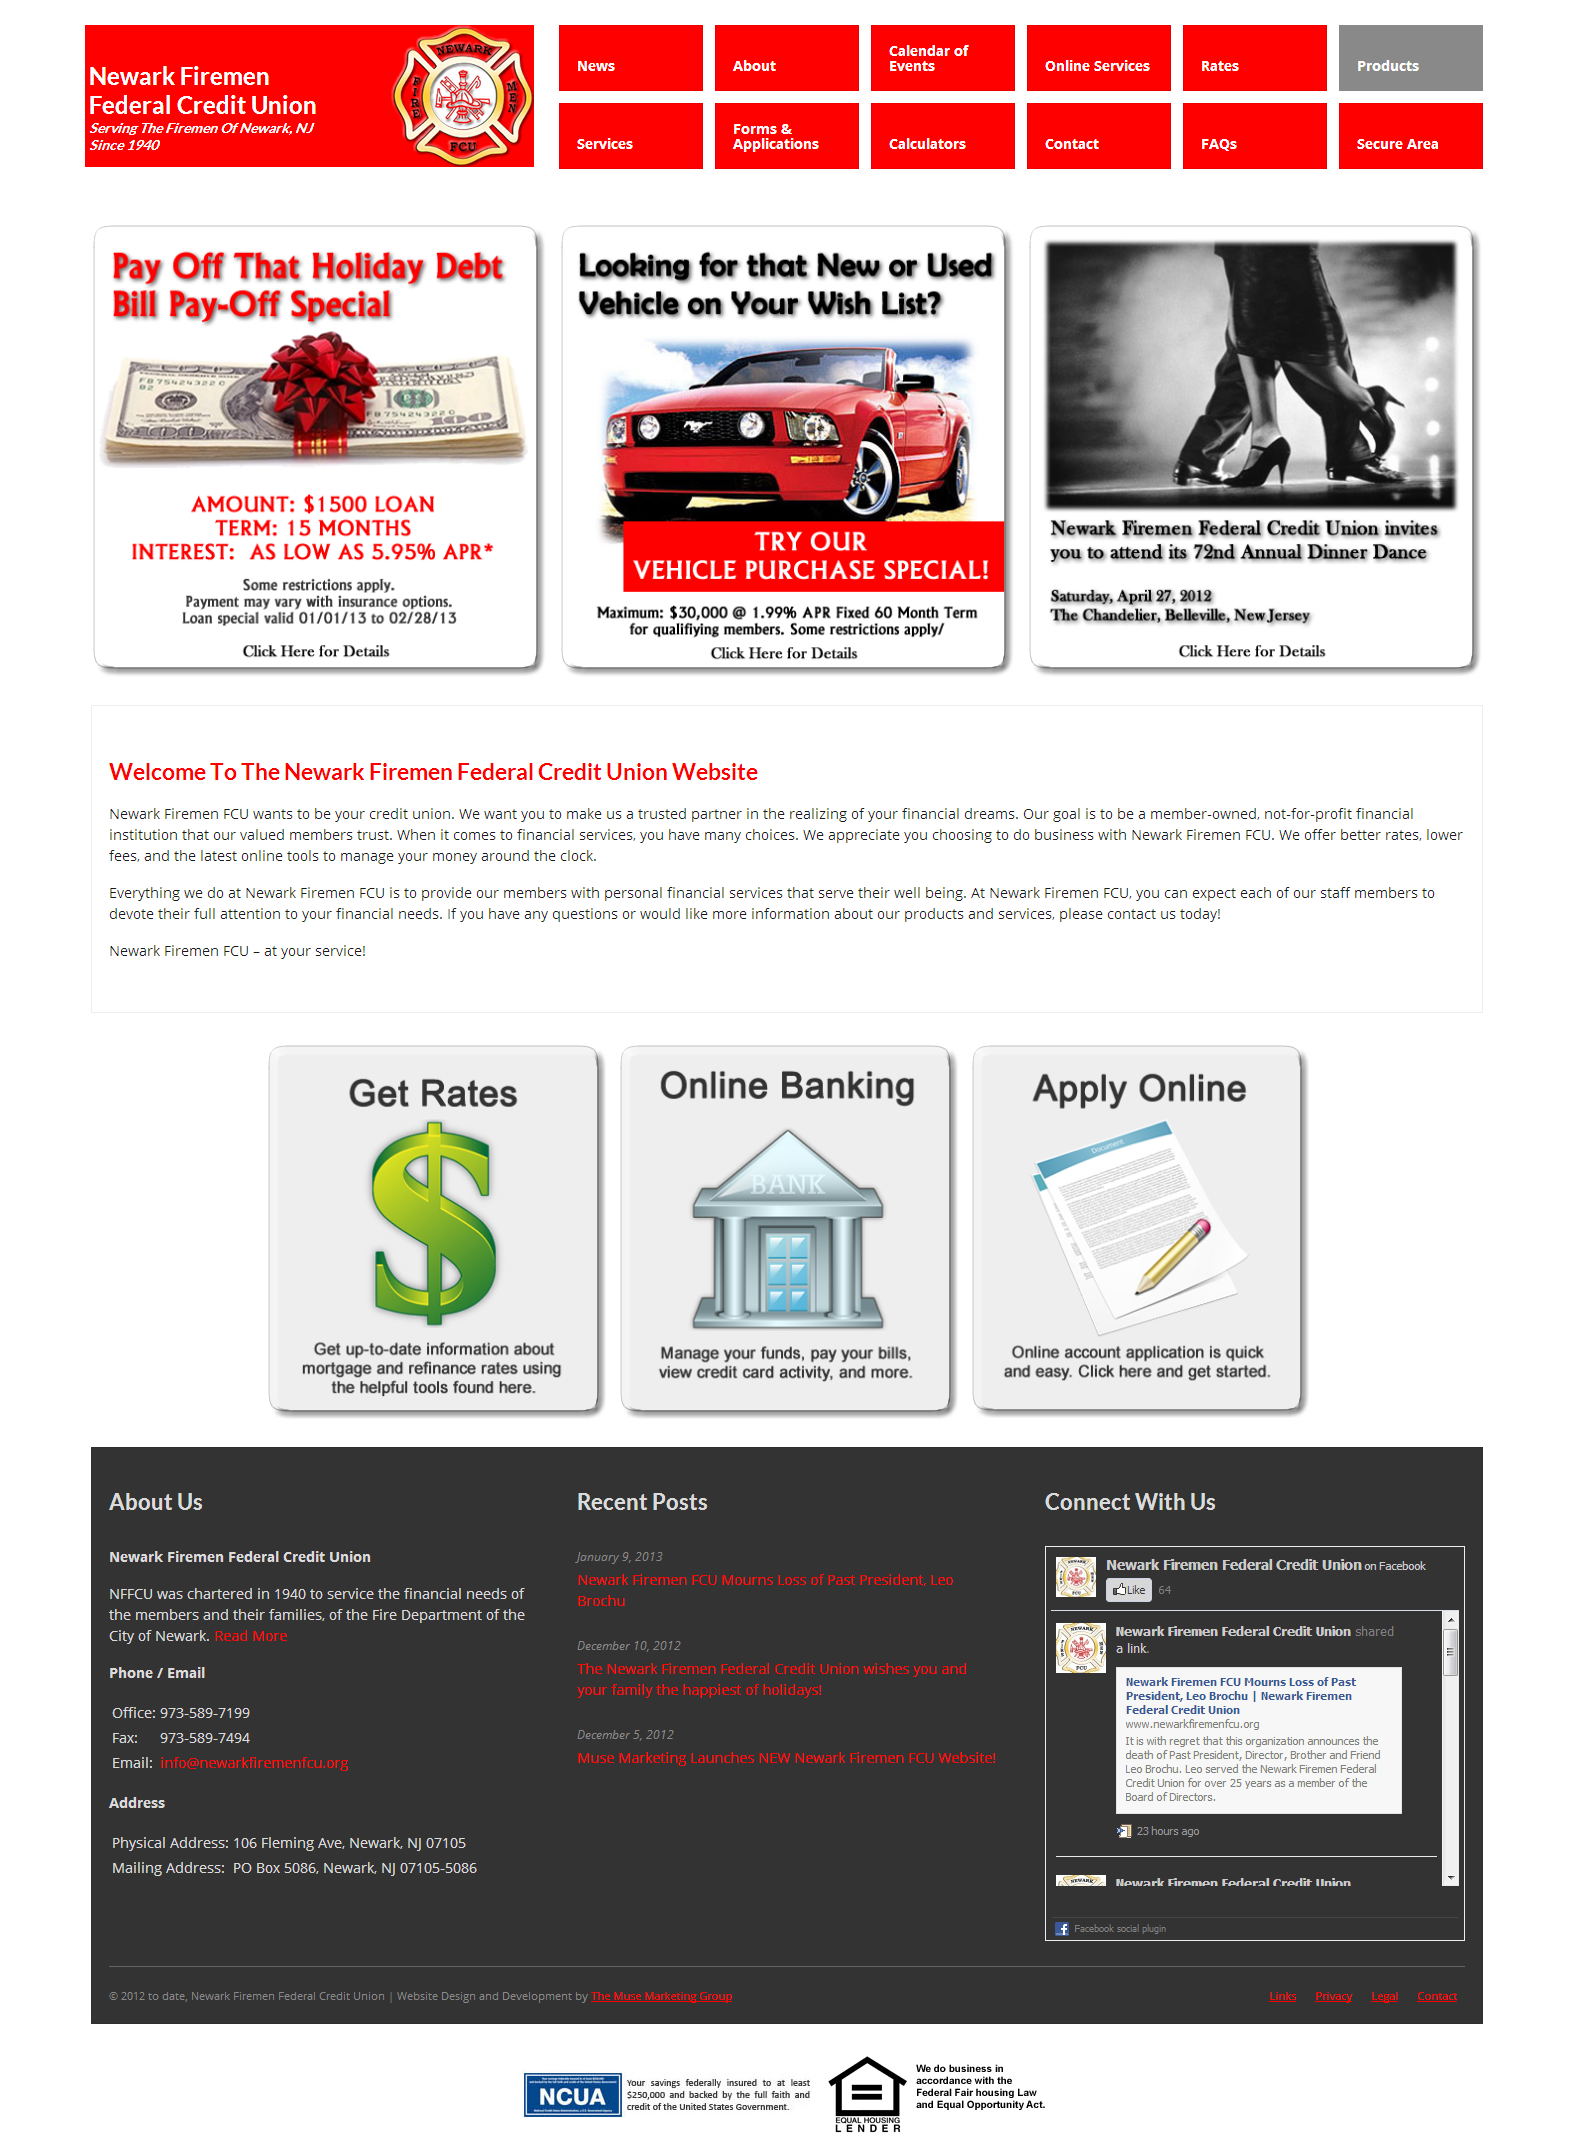 Muse Marketing introduces the new Newark Firemen Federal Credit Union Website